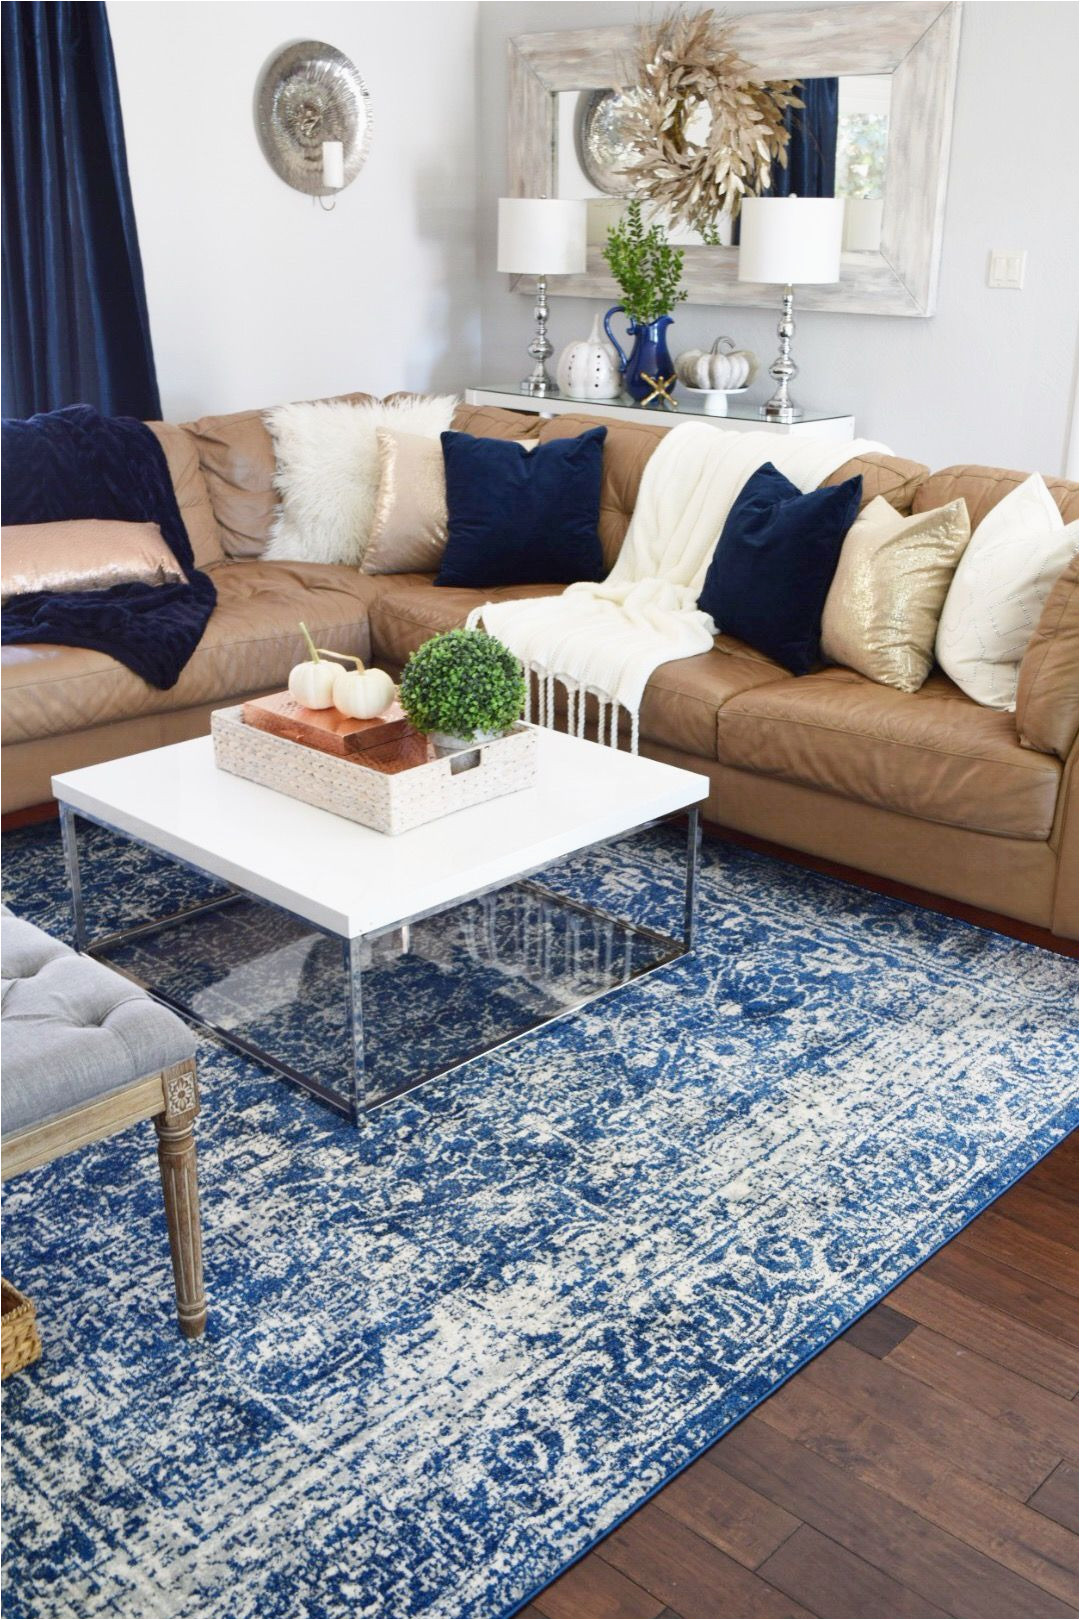 Neutral area Rugs for Living Room A Colorful area Rug is Grounded by Neutral Furniture and A